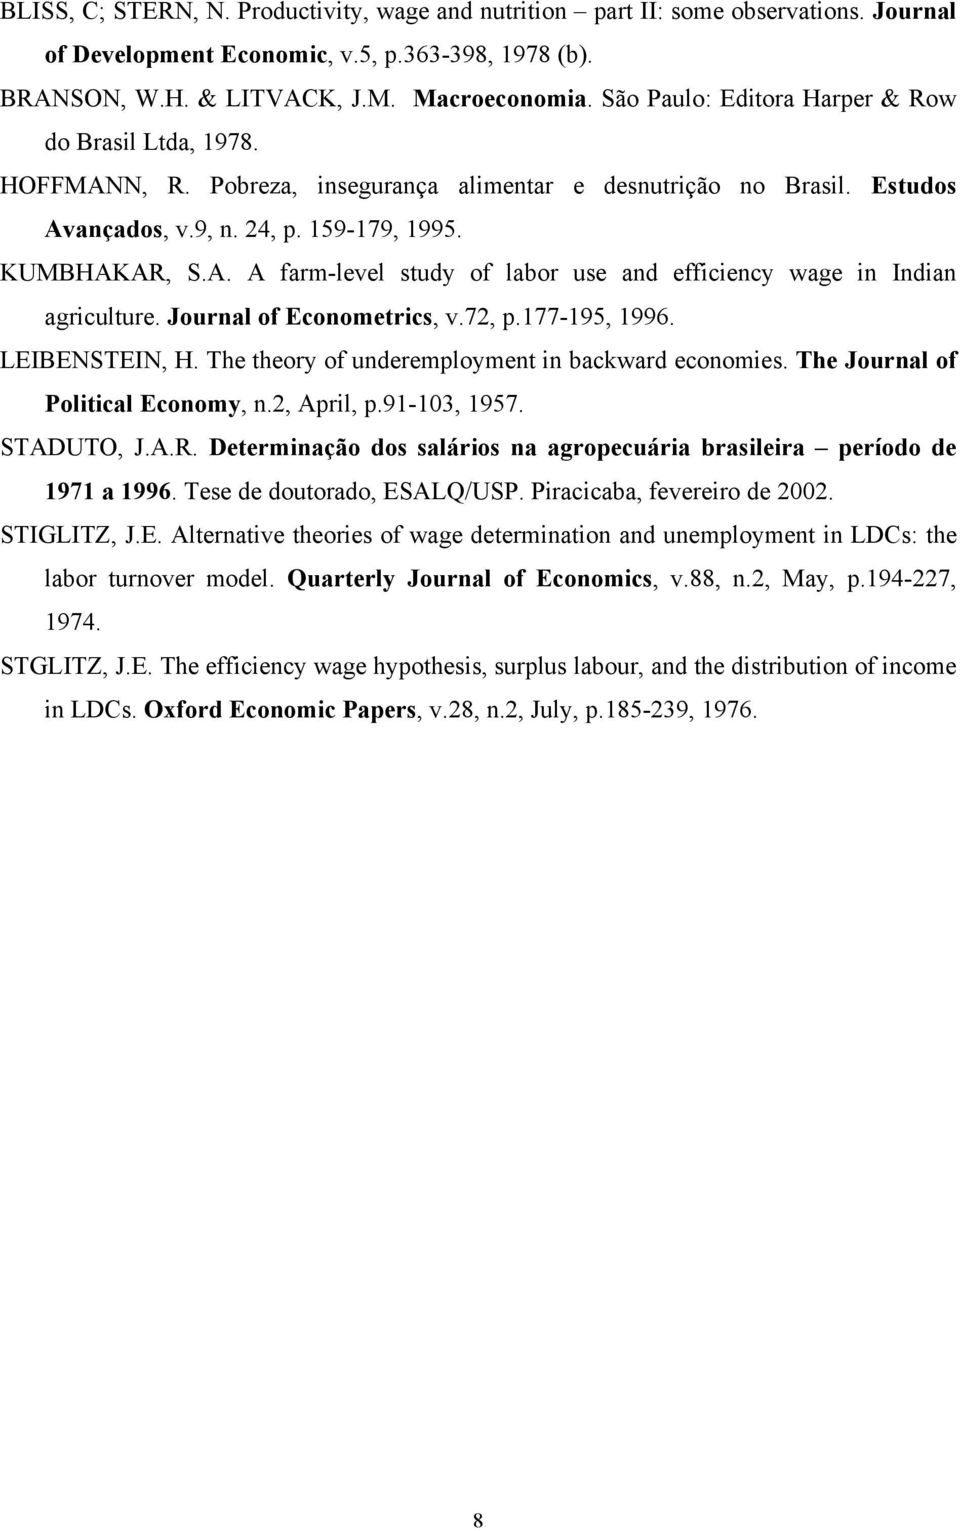 Journal of Econometrics, v.72, p.177-195, 1996. LEIBENSTEIN, H. The theory of underemployment in backward economies. The Journal of Political Economy, n.2, April, p.91-103, 1957. STADUTO, J.A.R.